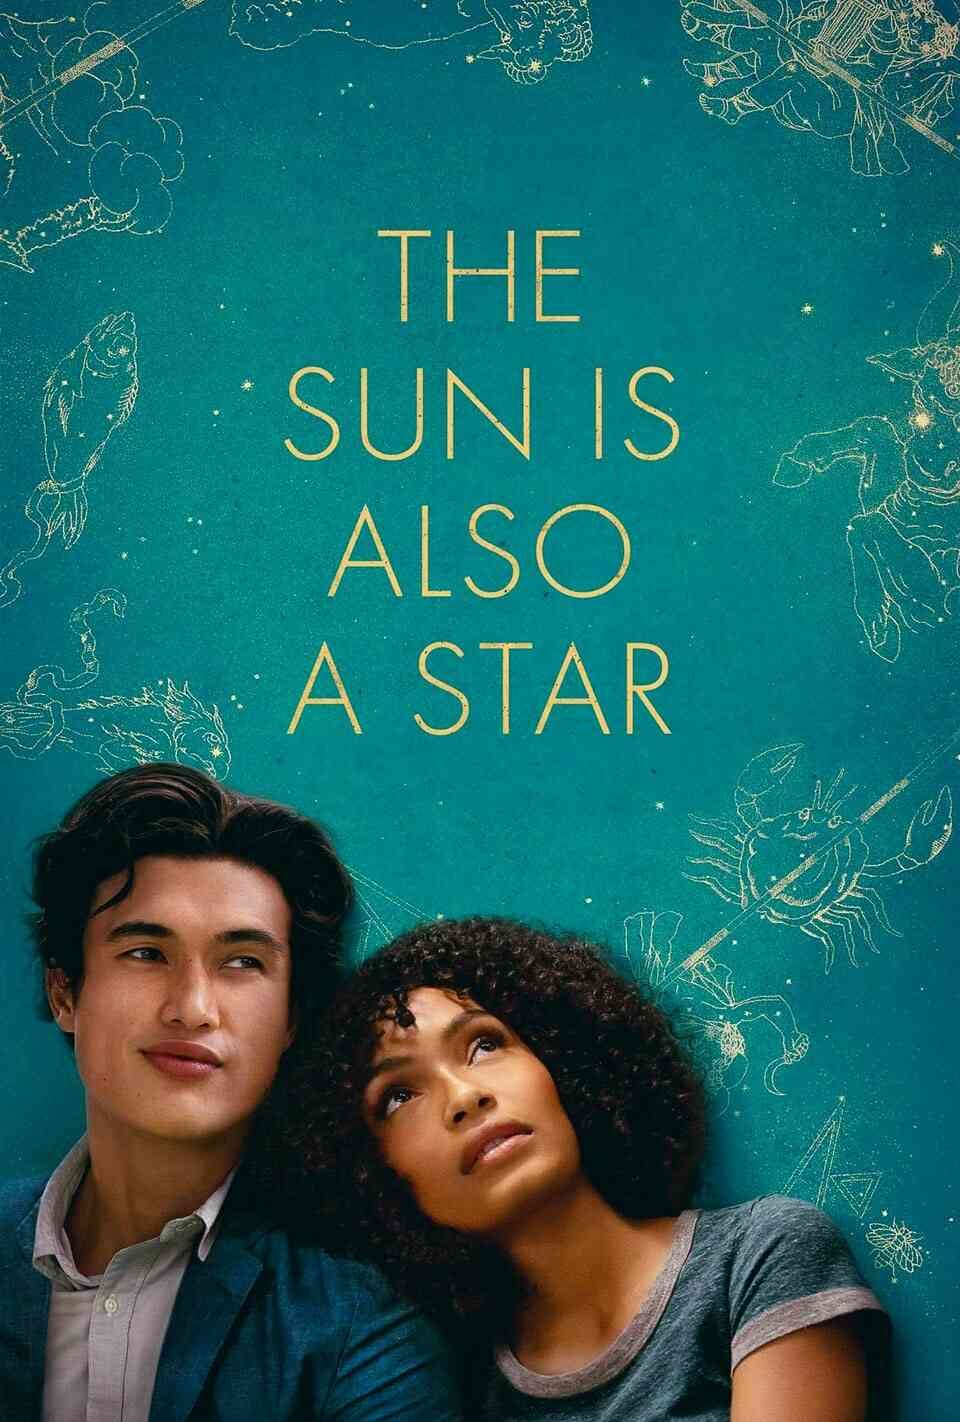 Read The Sun Is Also a Star screenplay (poster)